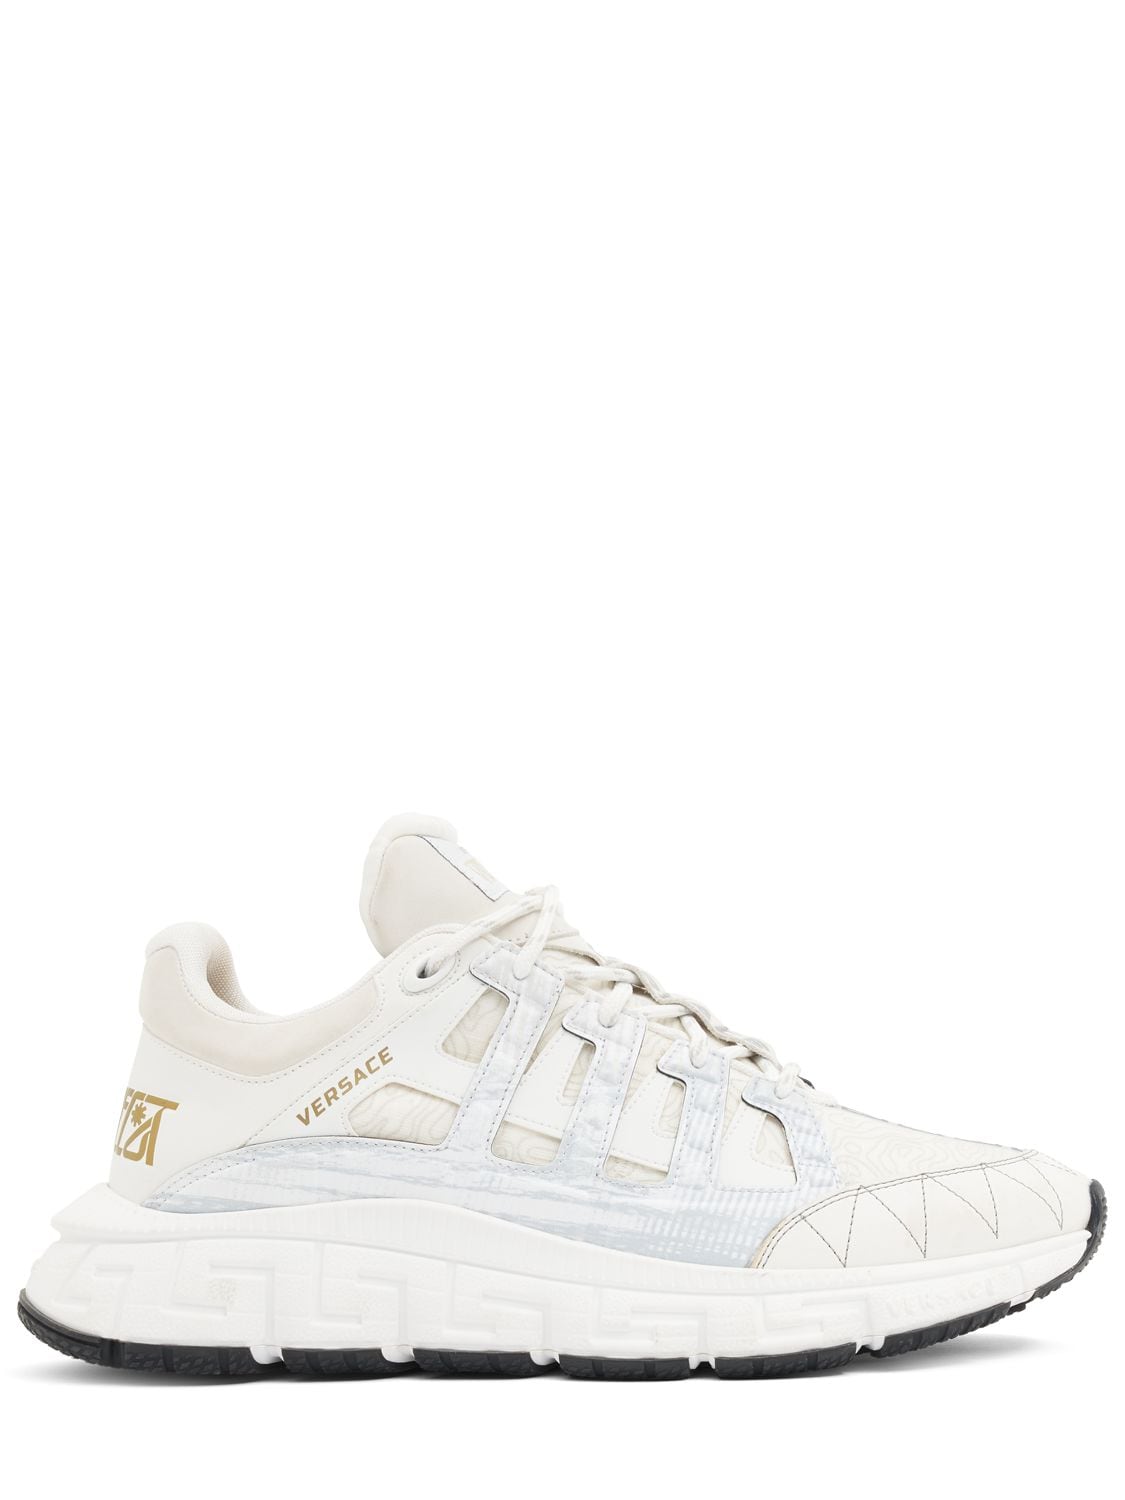 Versace Leather Sneakers In White,gold